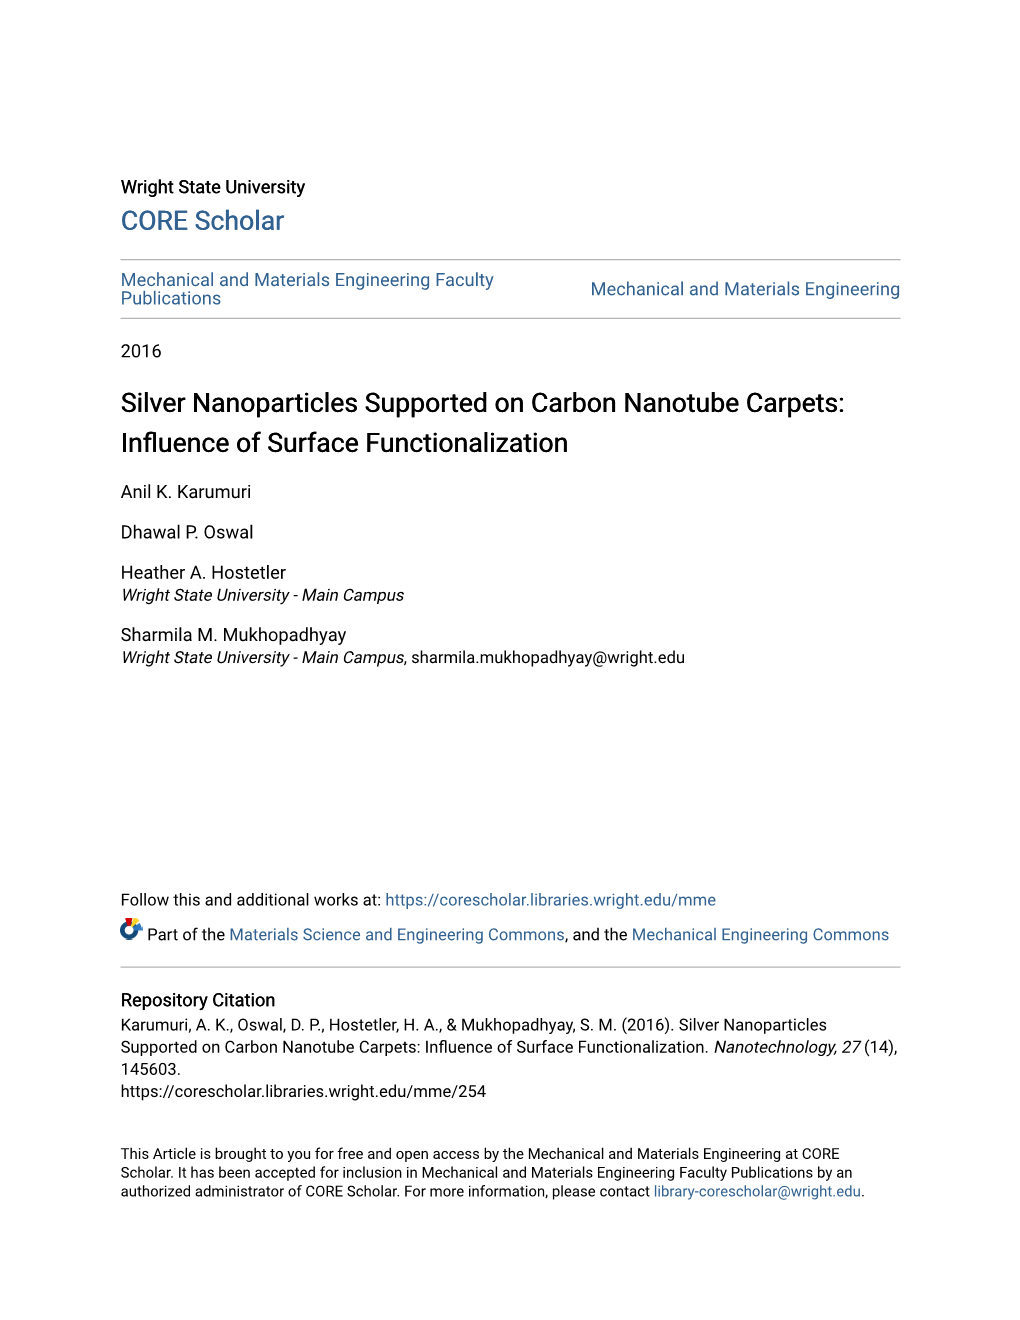 Silver Nanoparticles Supported on Carbon Nanotube Carpets: Influence of Surface Functionalization